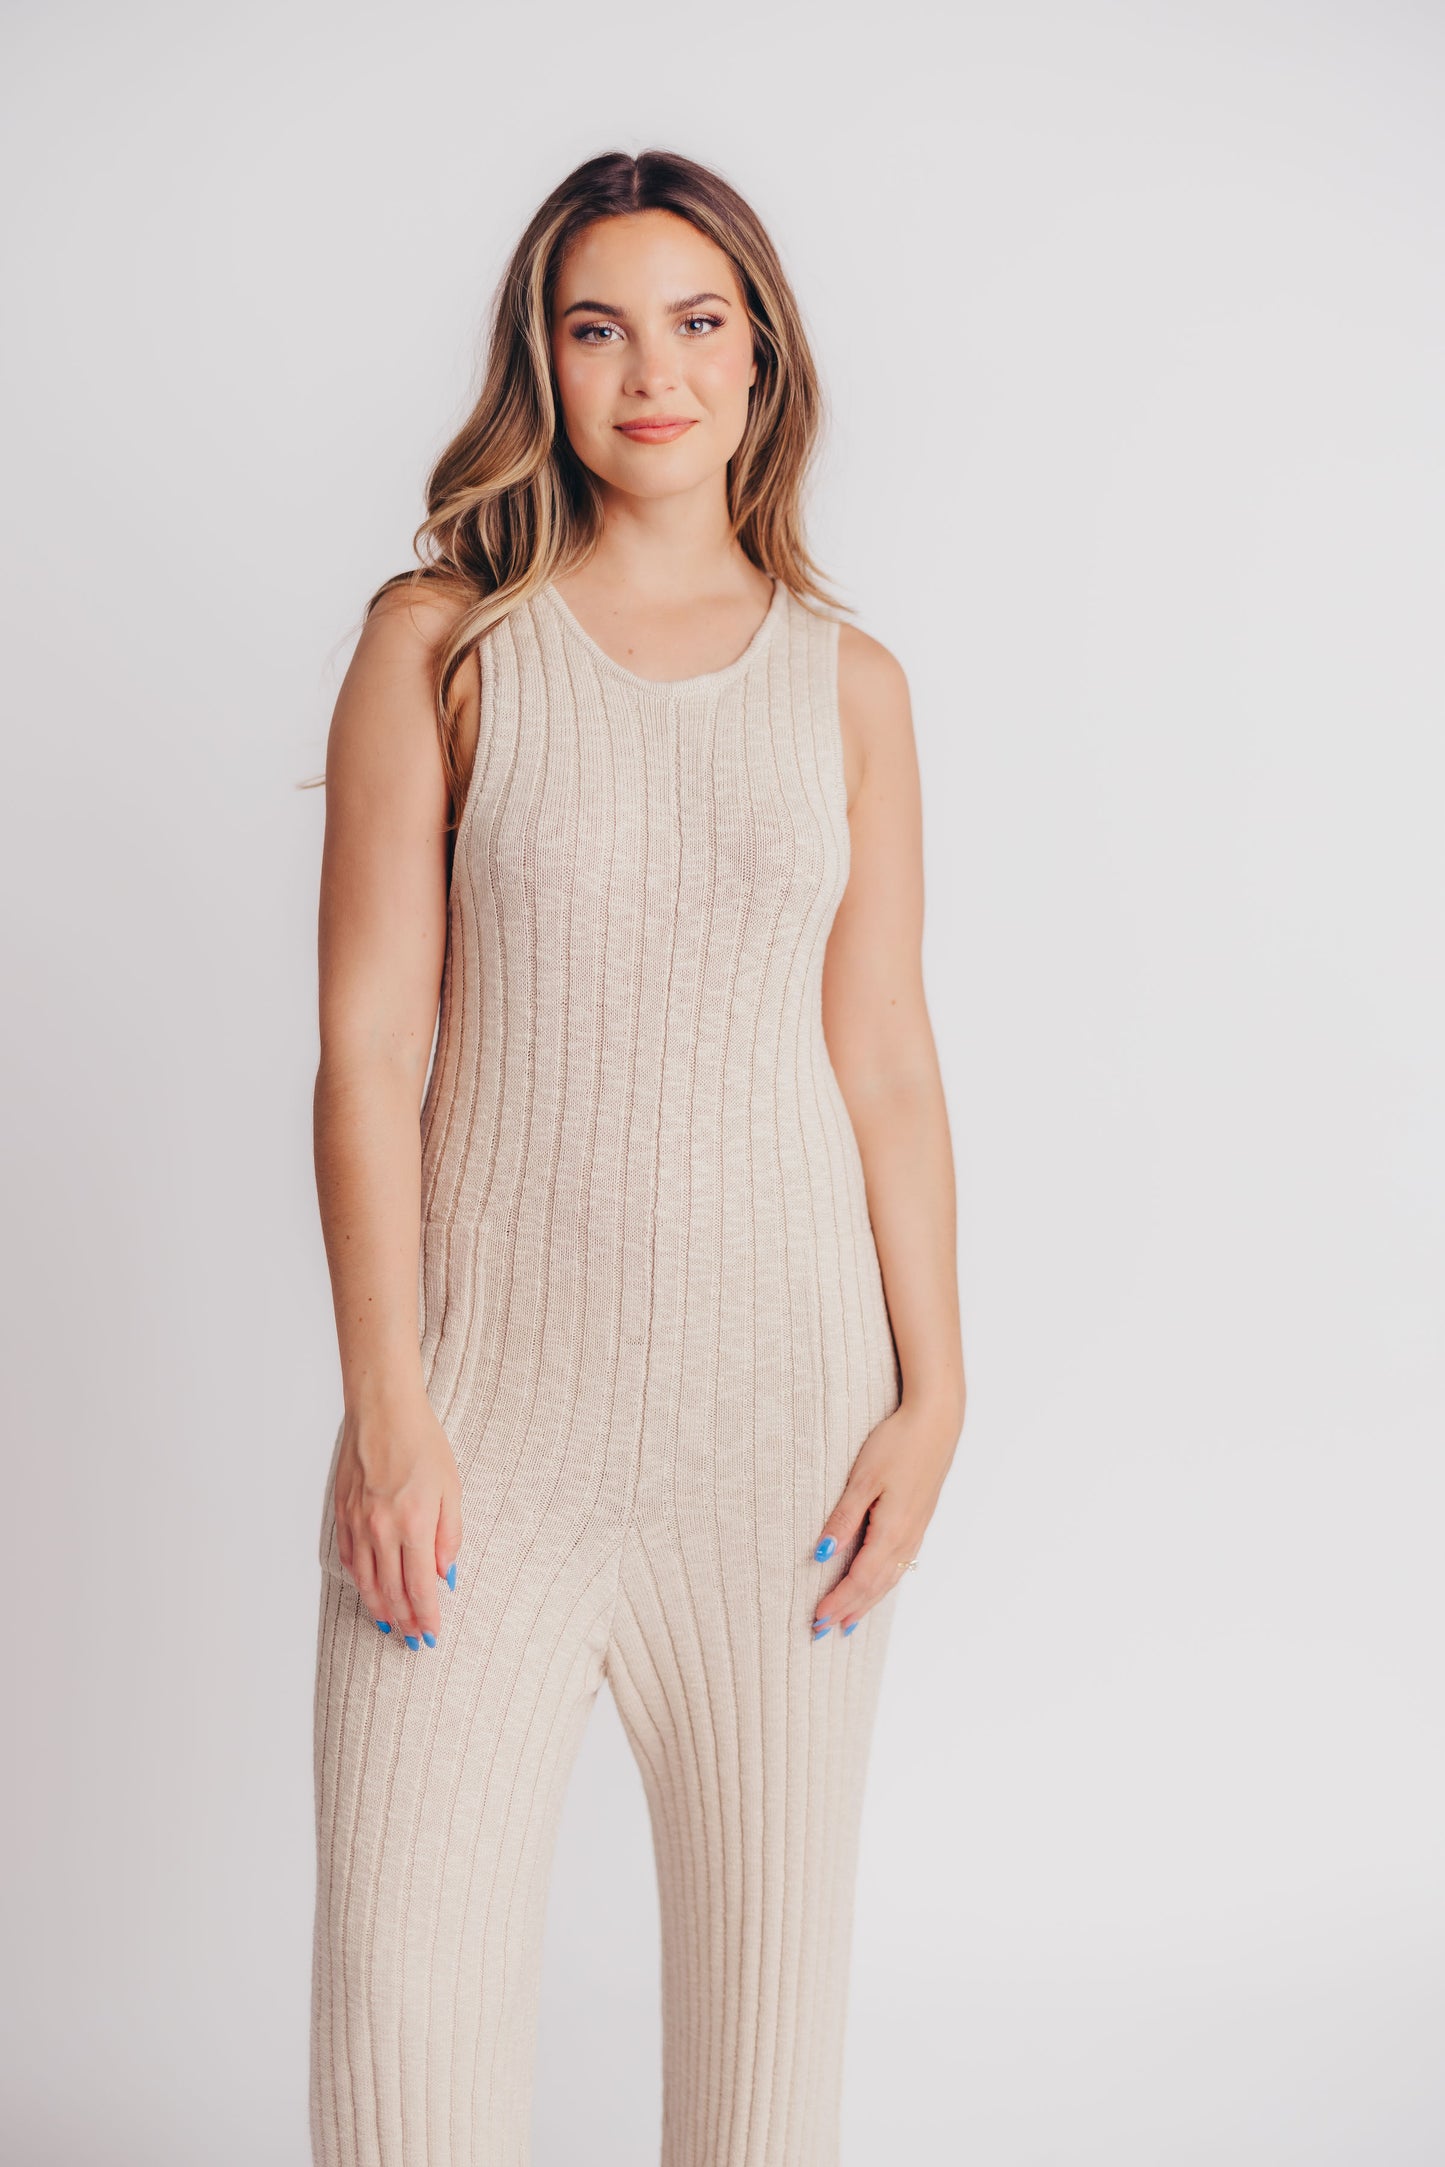 Easy Summer Days Jumpsuit in Natural - Bump Friendly